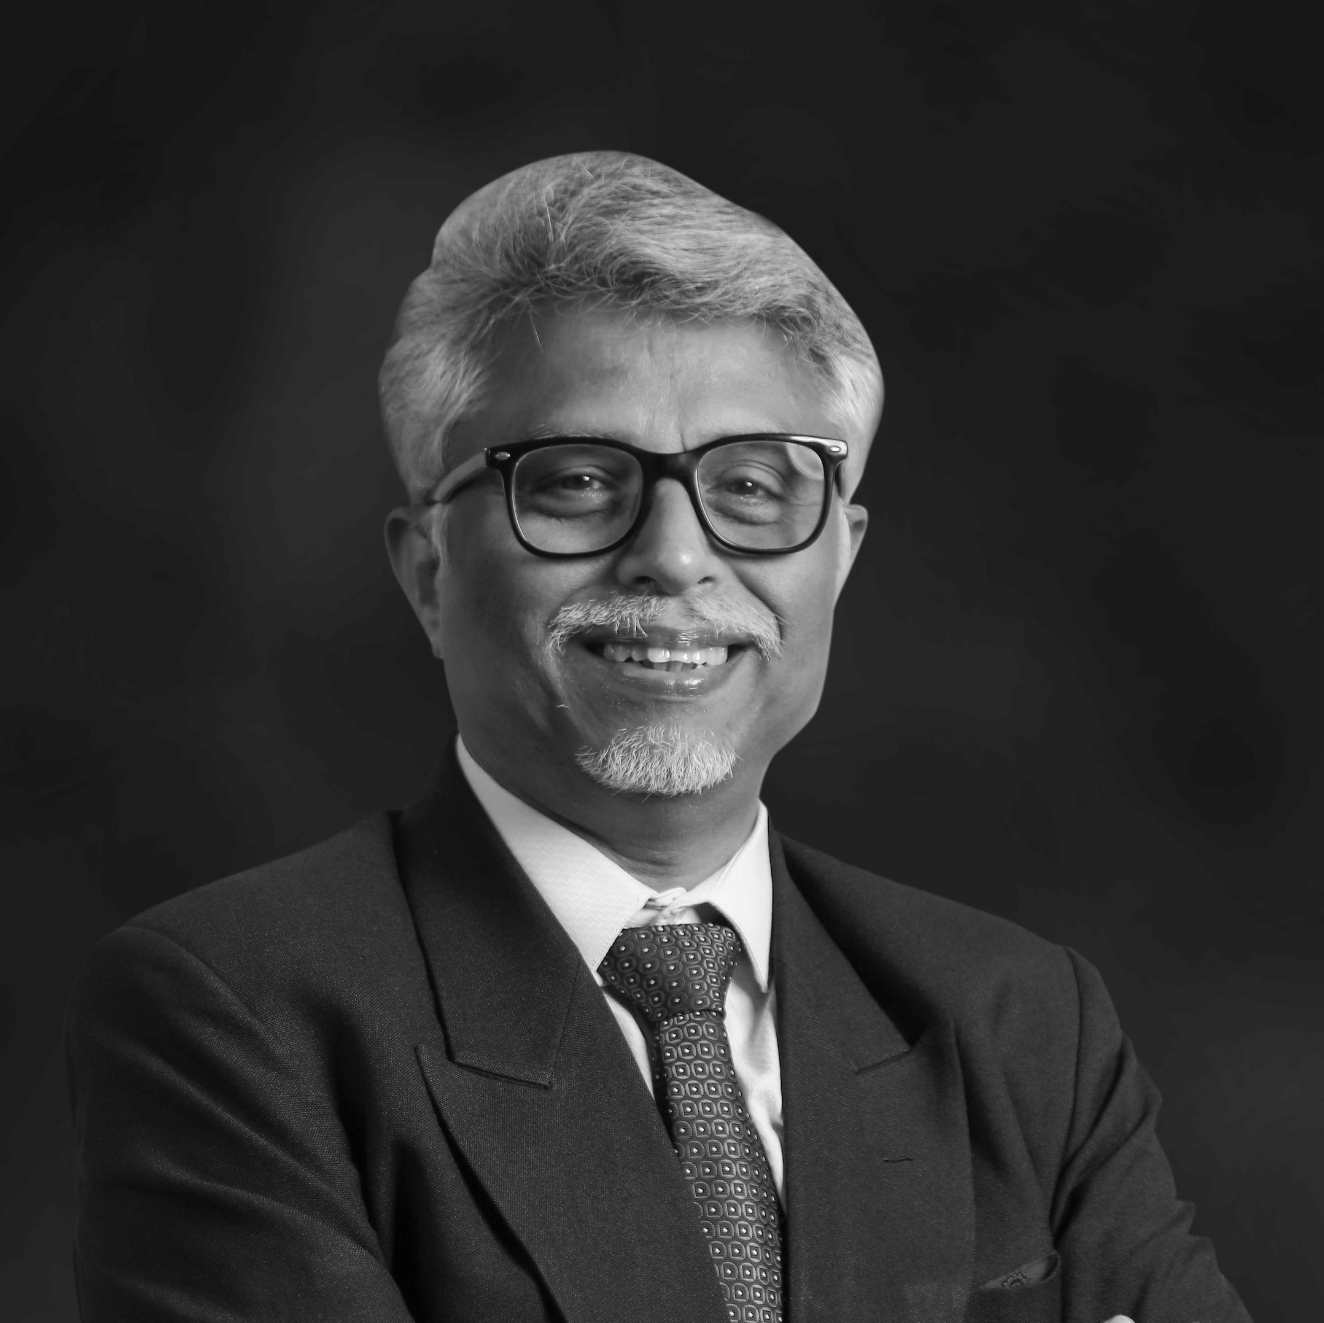 Prof. Sridar is the Dean of Chennai Business School (Chennai colleges for mba)